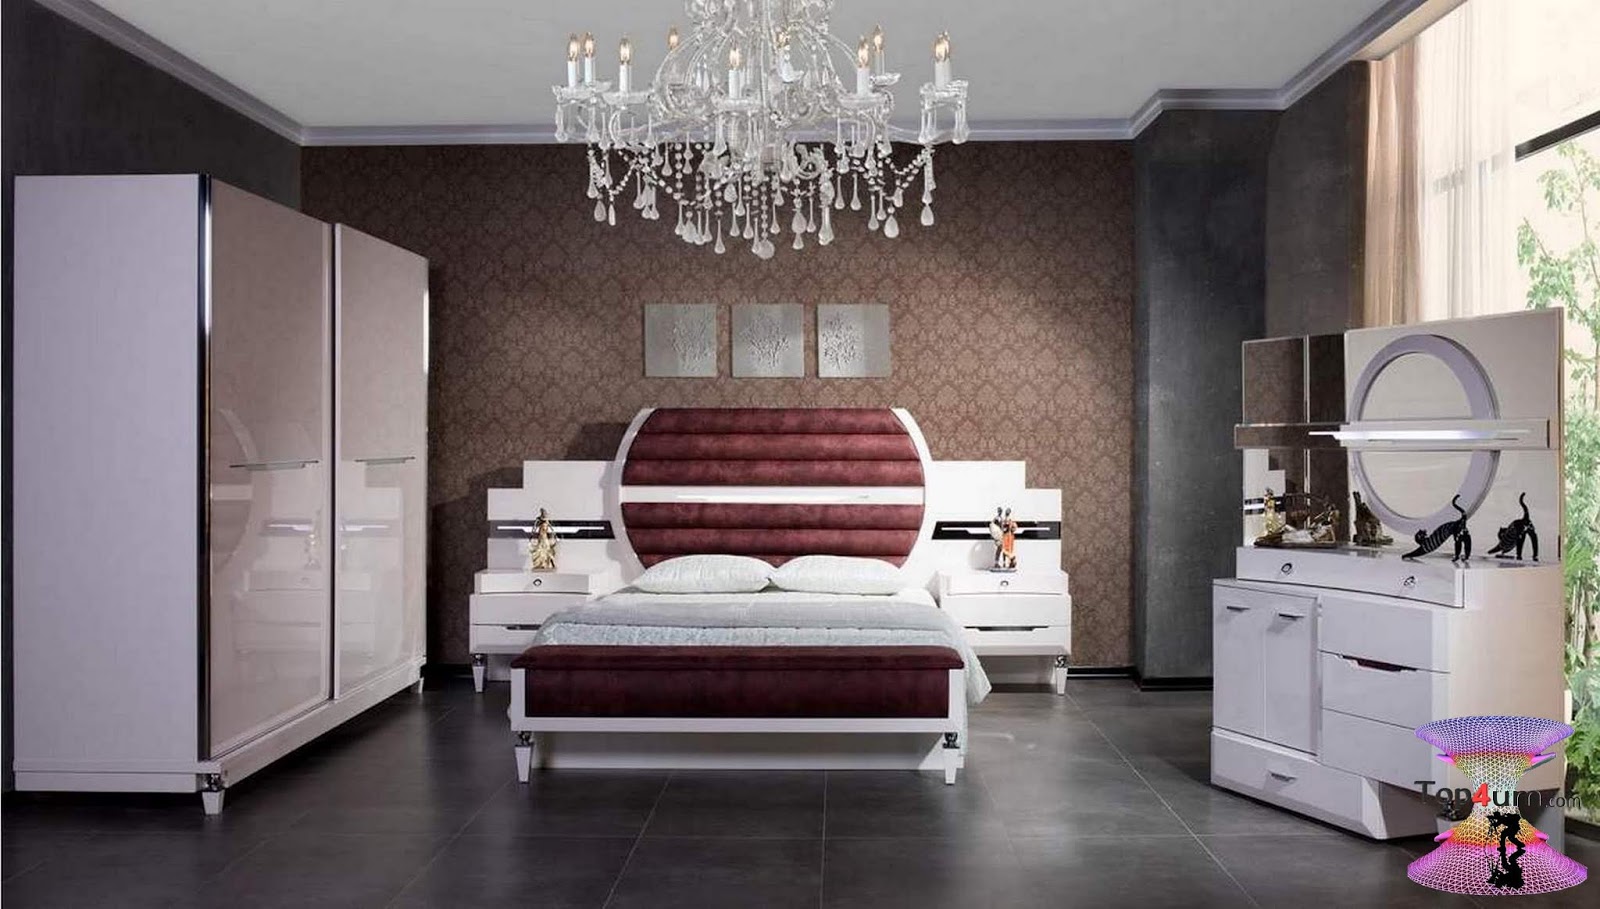 The Latest Catalog Of Bedrooms Images 2020